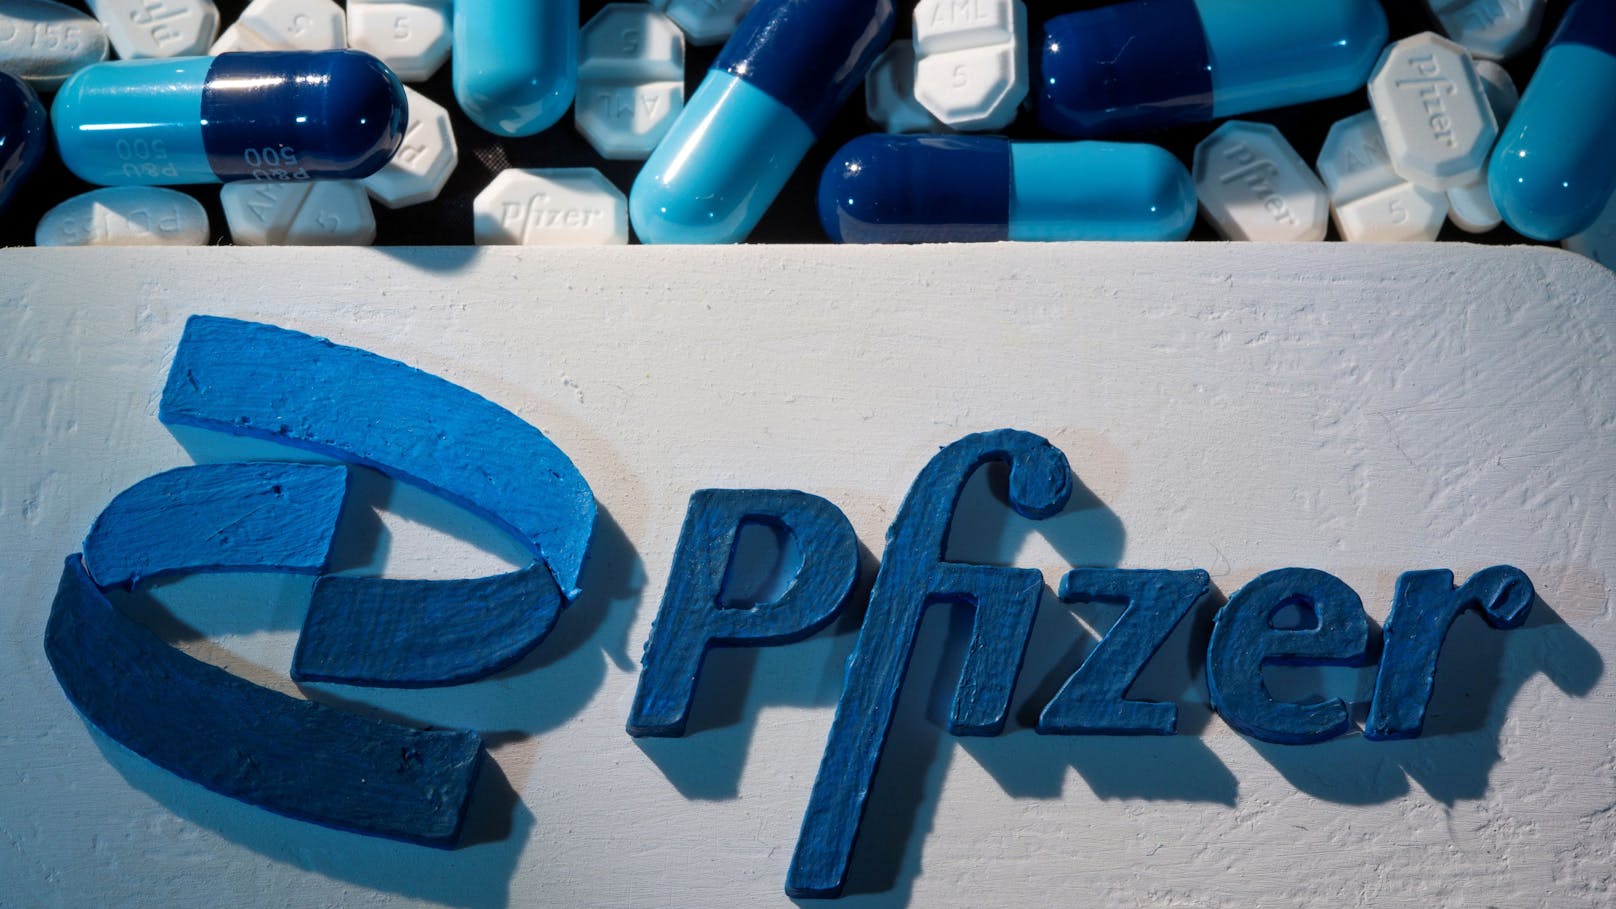 FILE PHOTO: A 3D printed Pfizer logo is placed near medicines from the same manufacturer in this illustration taken September 29, 2021. REUTERS/Dado Ruvic/Illustration/File Photo